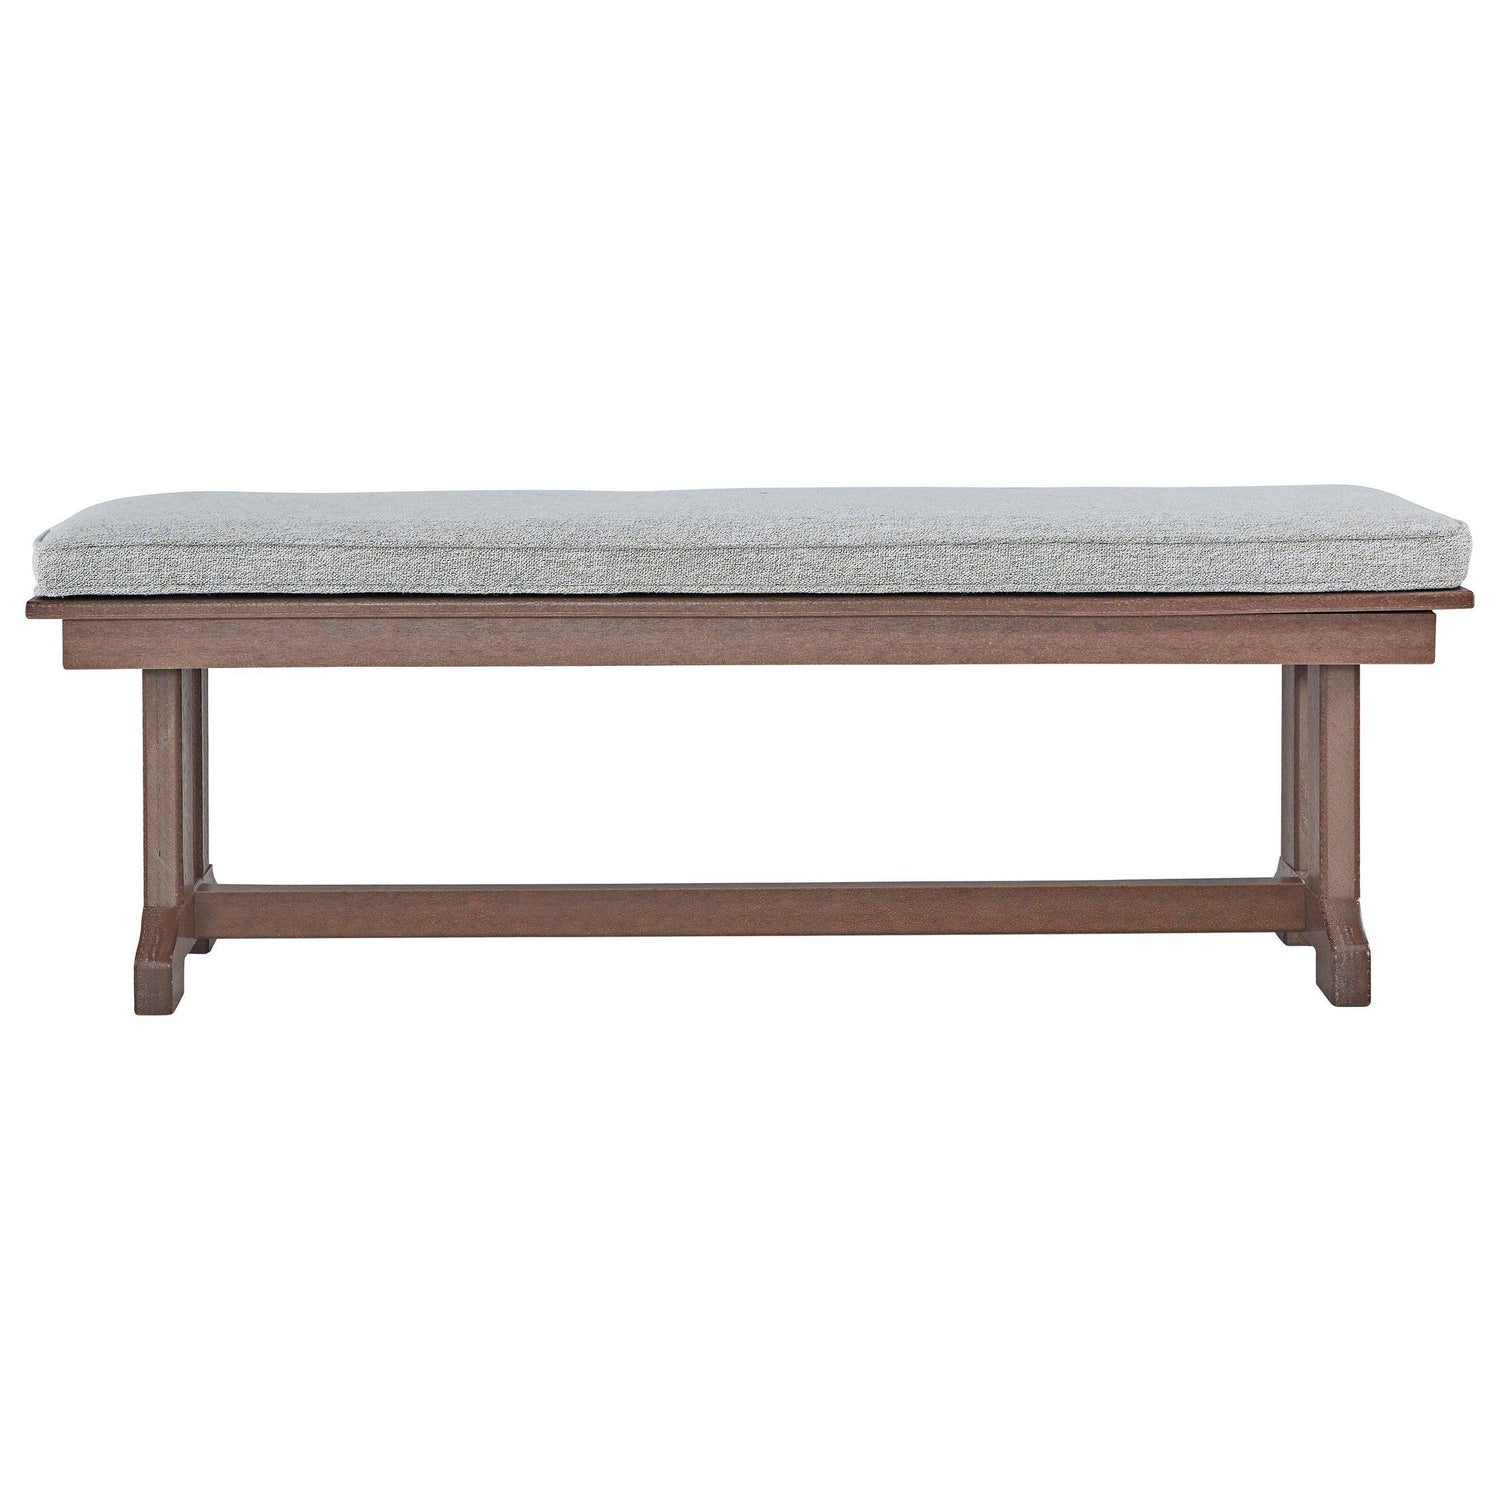 Emmeline Outdoor Dining Bench with Cushion Ash-P420-600